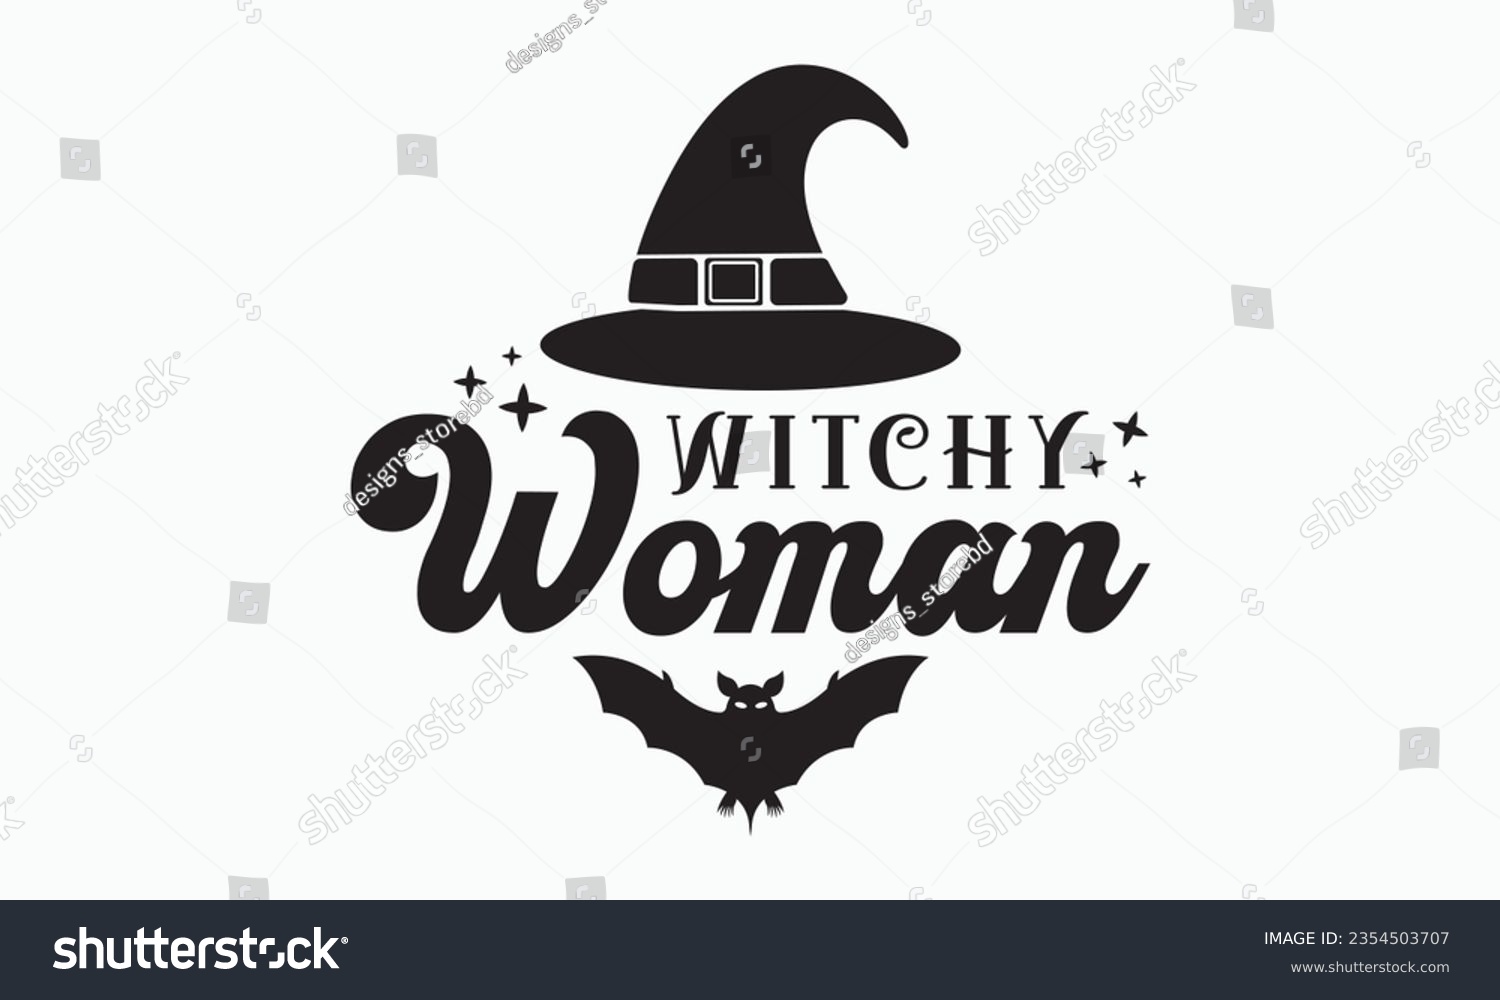 SVG of Witchy woman svg, halloween svg design bundle, Retro halloween svg, happy halloween vector, pumpkin, witch, spooky, ghost, funny halloween t-shirt quotes Bundle, Cut File Cricut, Silhouette  svg